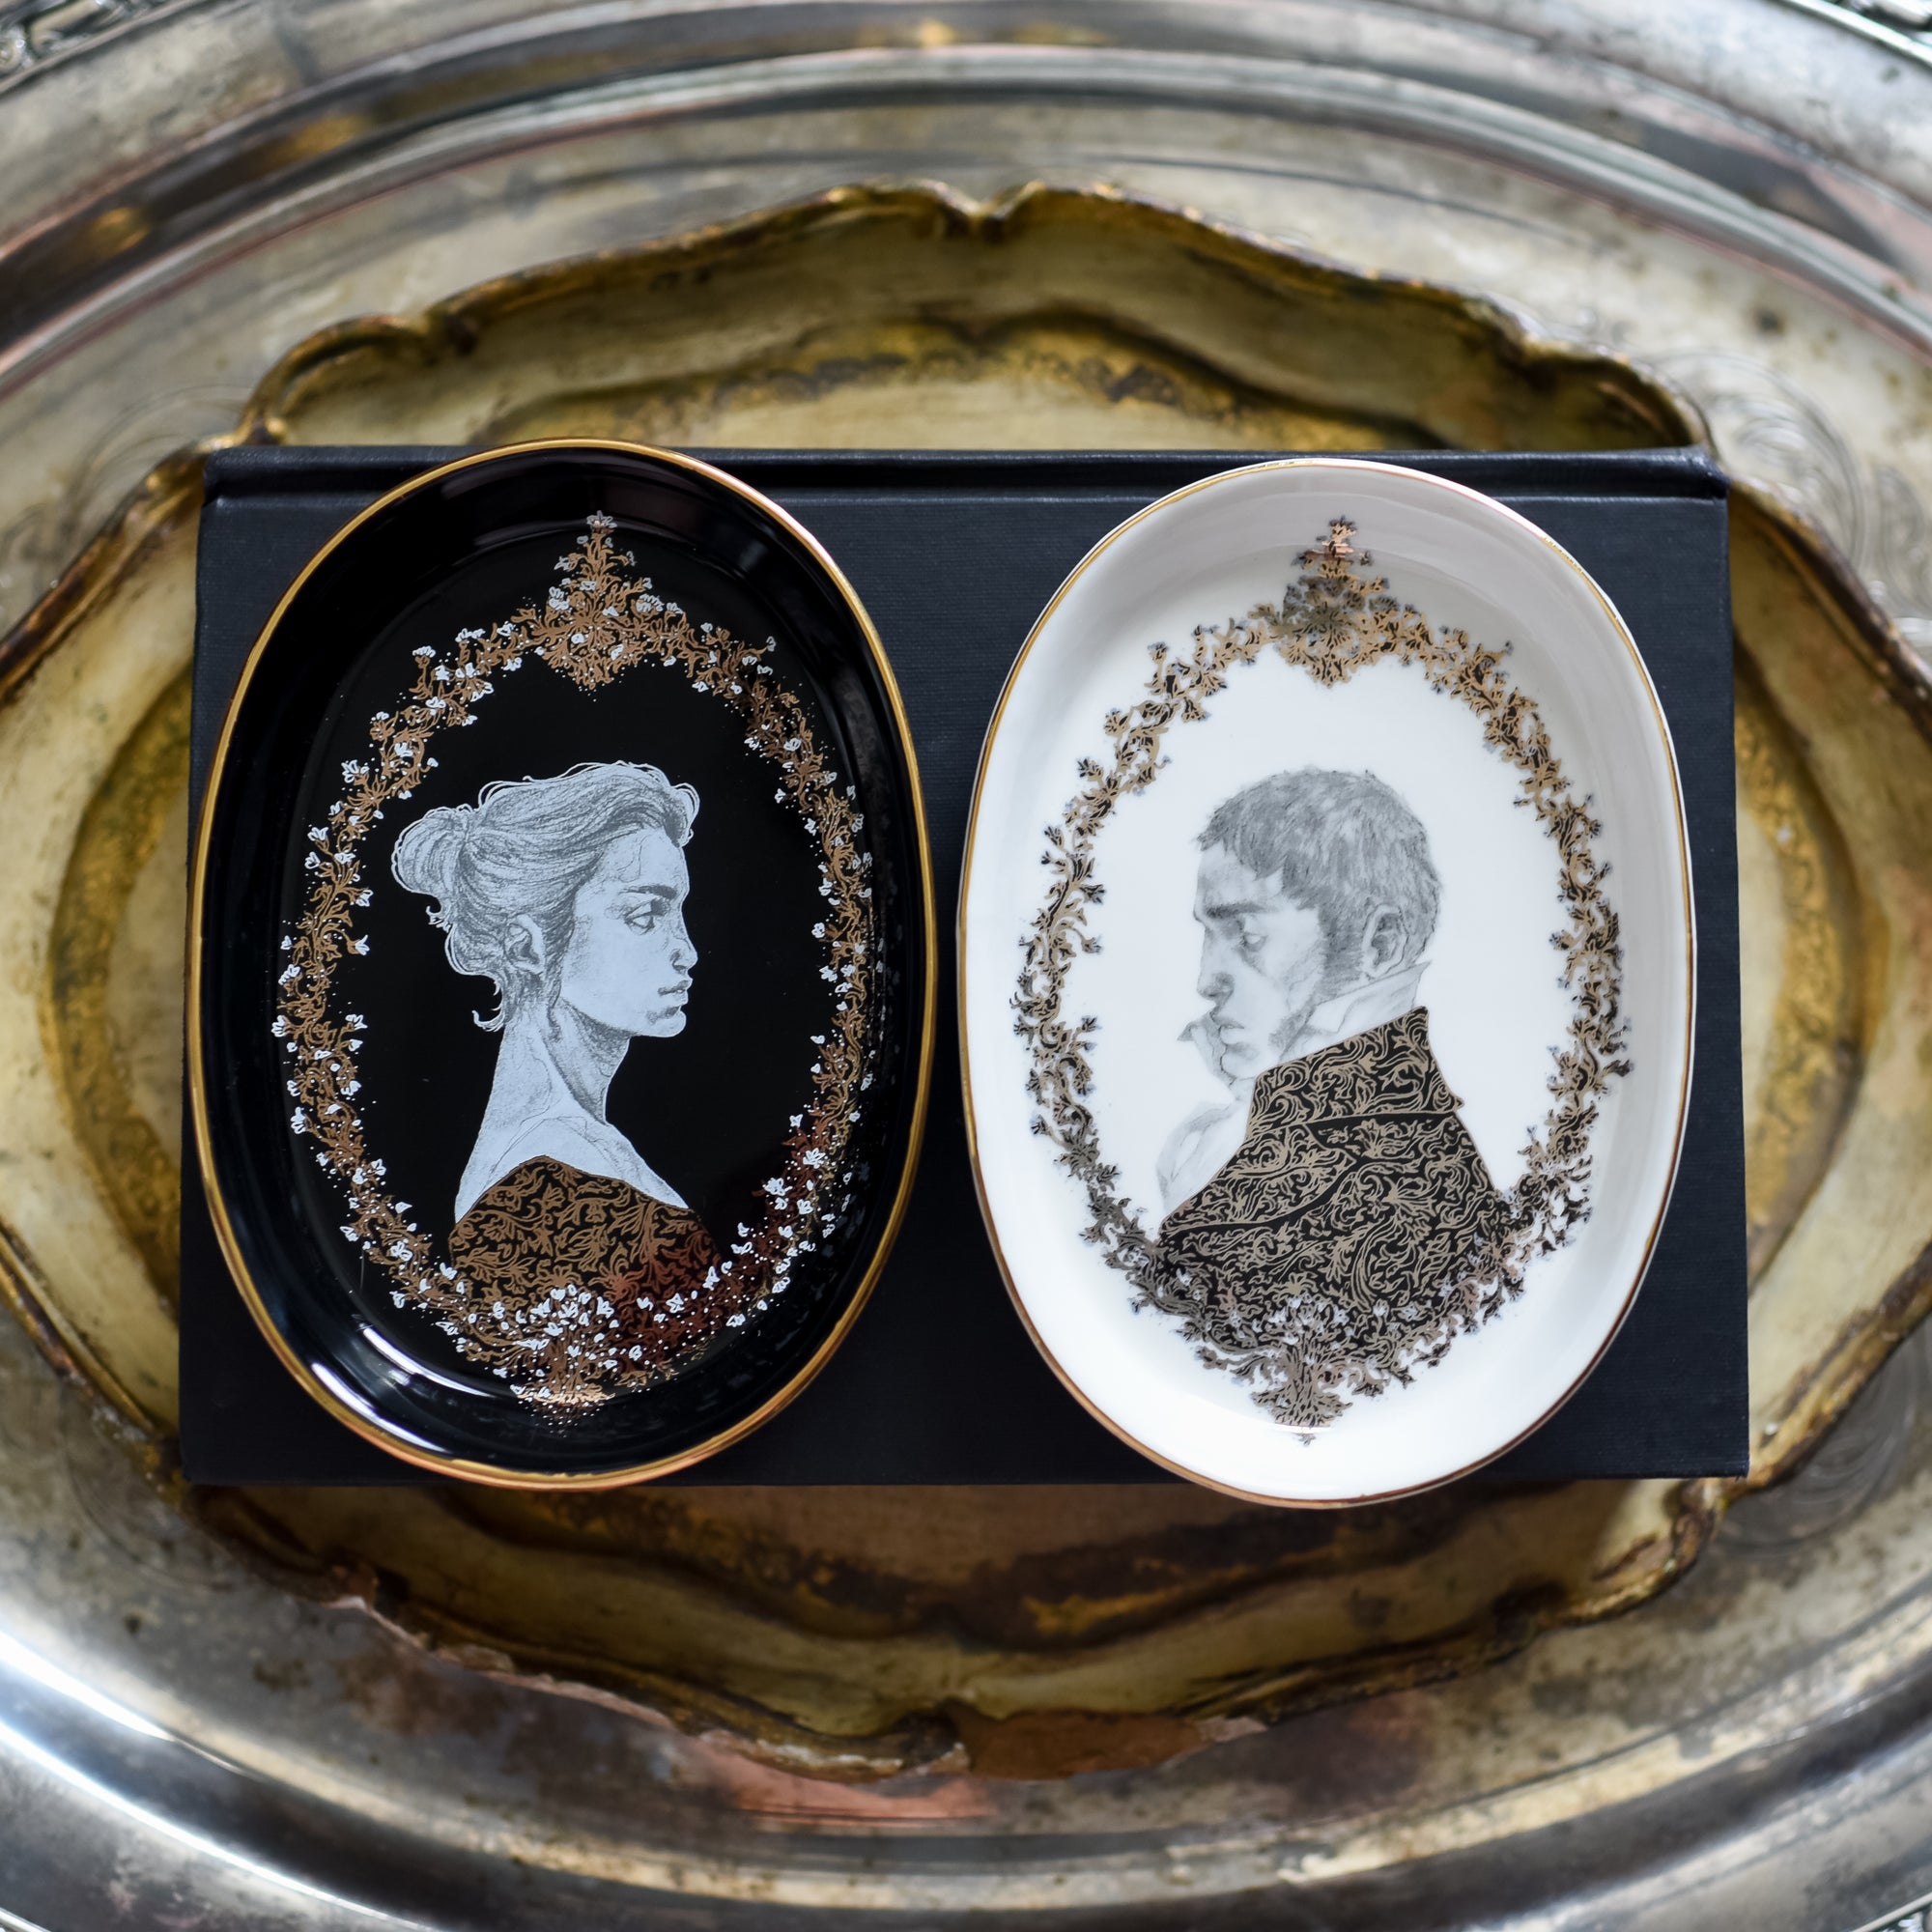 Pride & Prejudice Trinket Dish - this includes two oval dishes: black dish with Elizabeth and white dish with Mr. Darcy